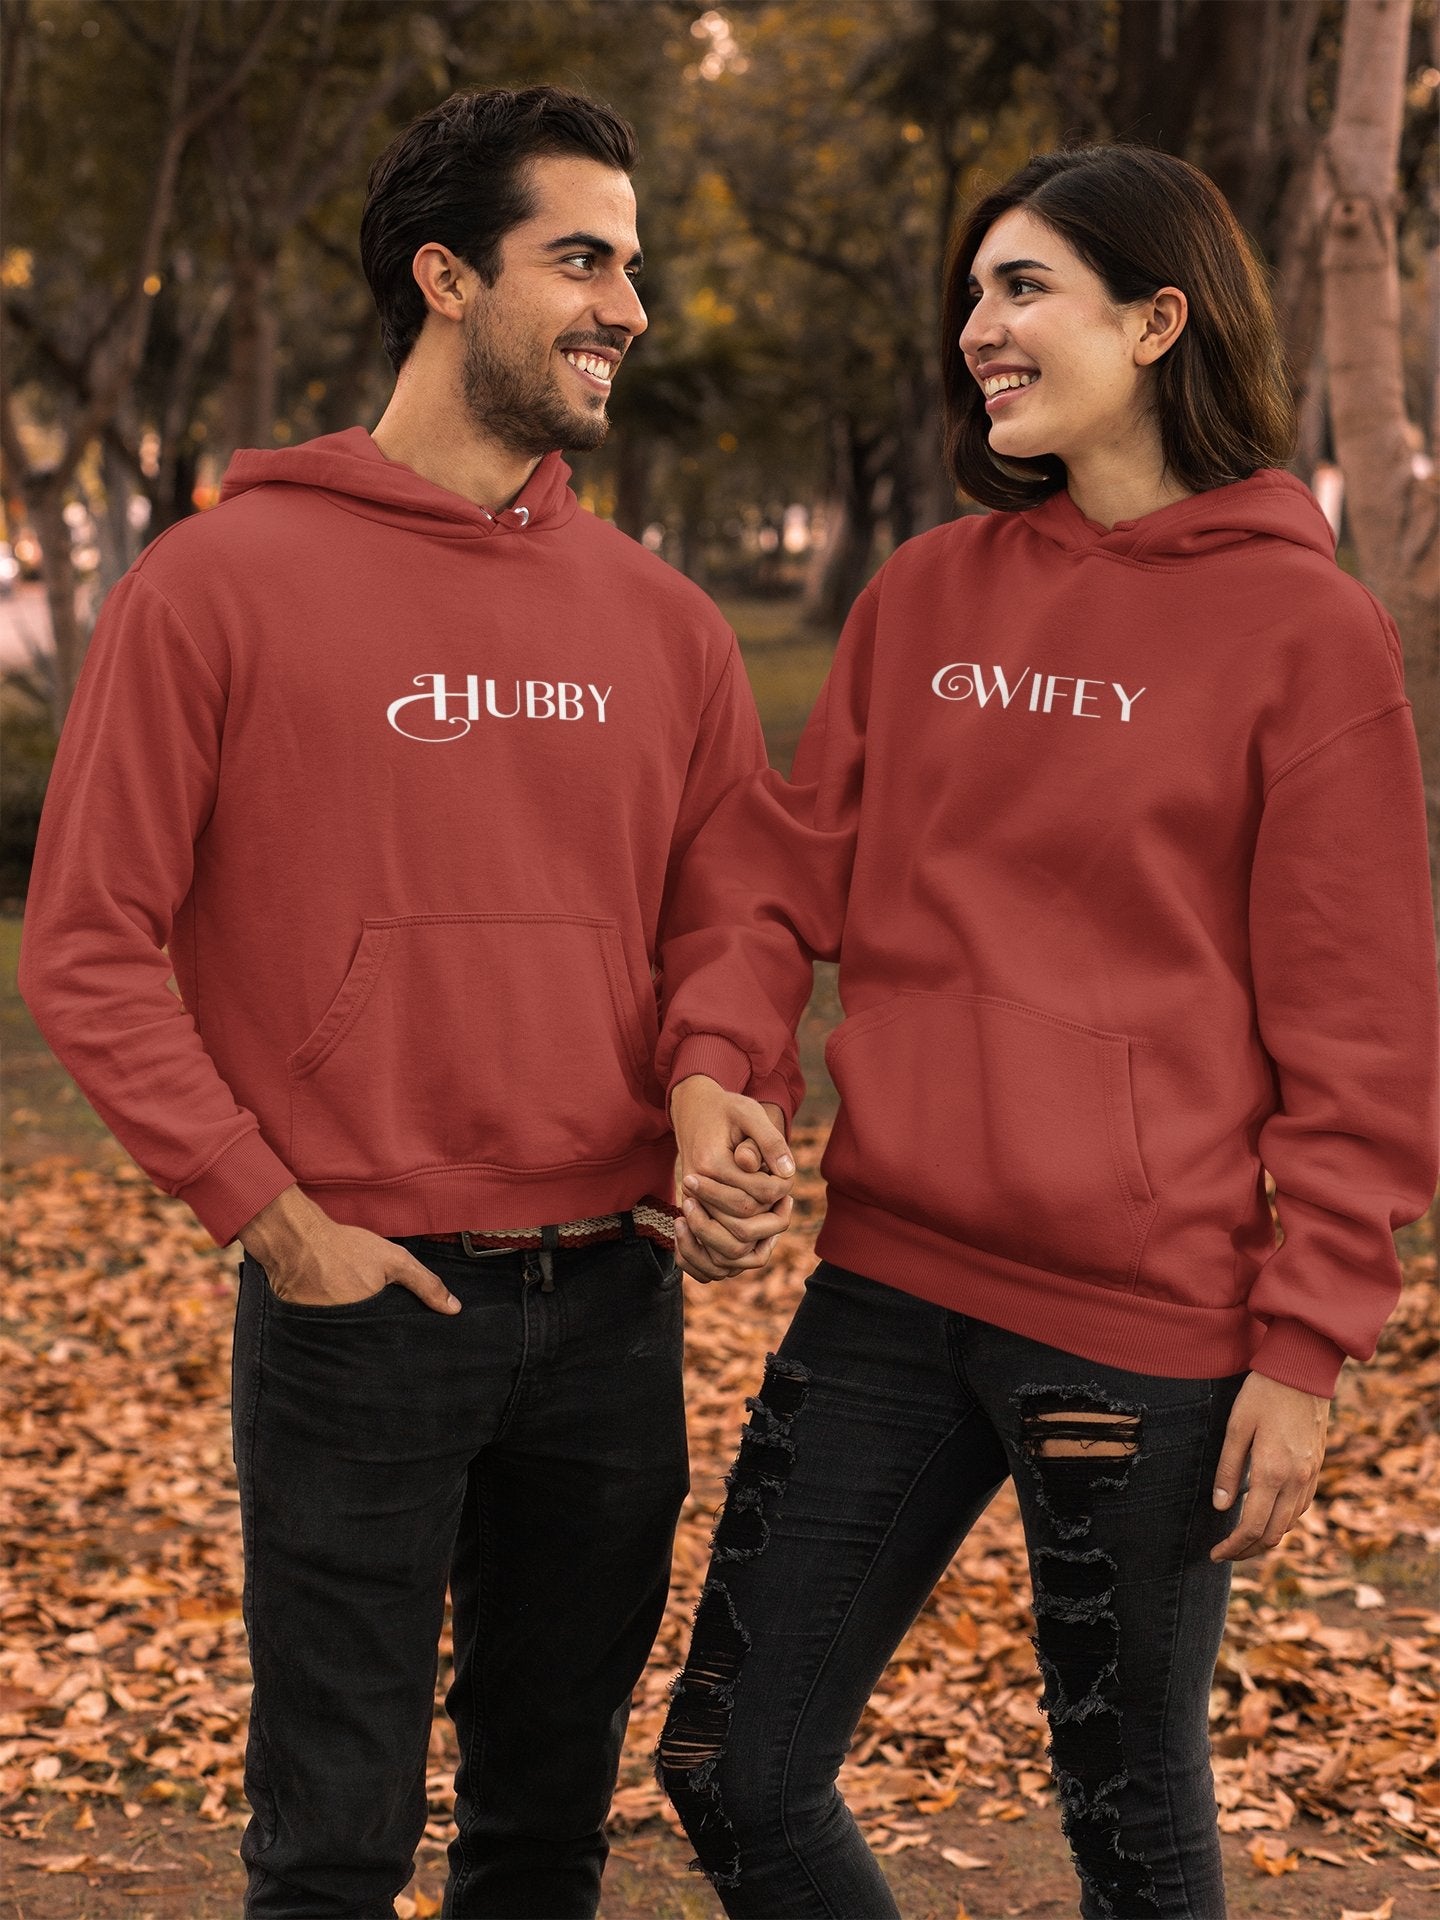 Hubby Wifey Couple Hoodie-FunkyTradition - FunkyTradition